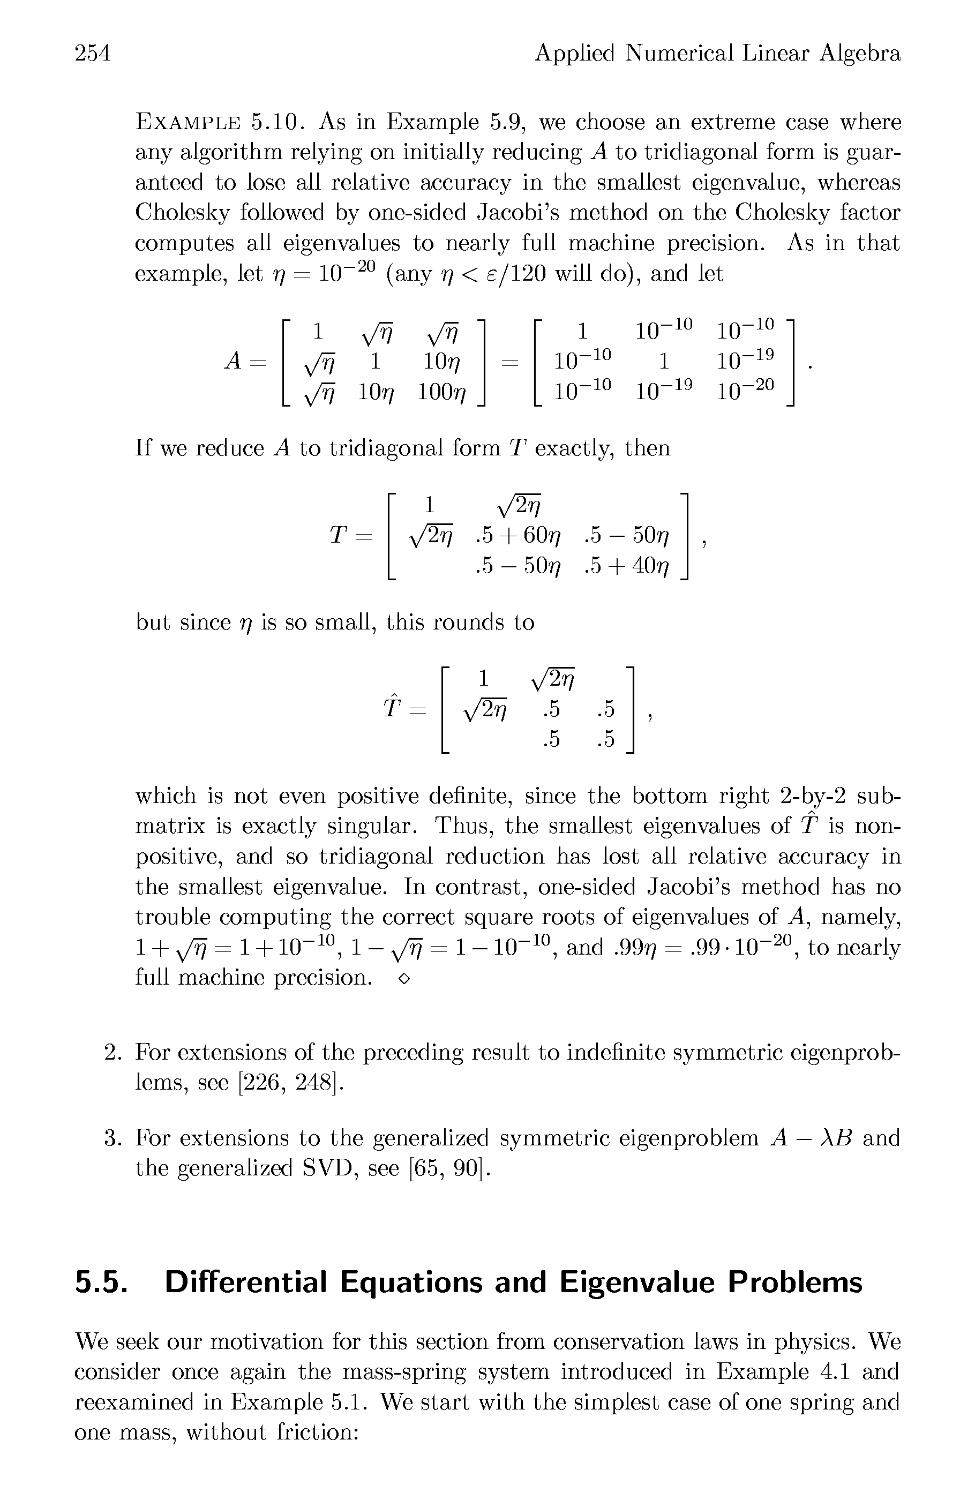 5.5 Differential Equations and Eigenvalue Problems